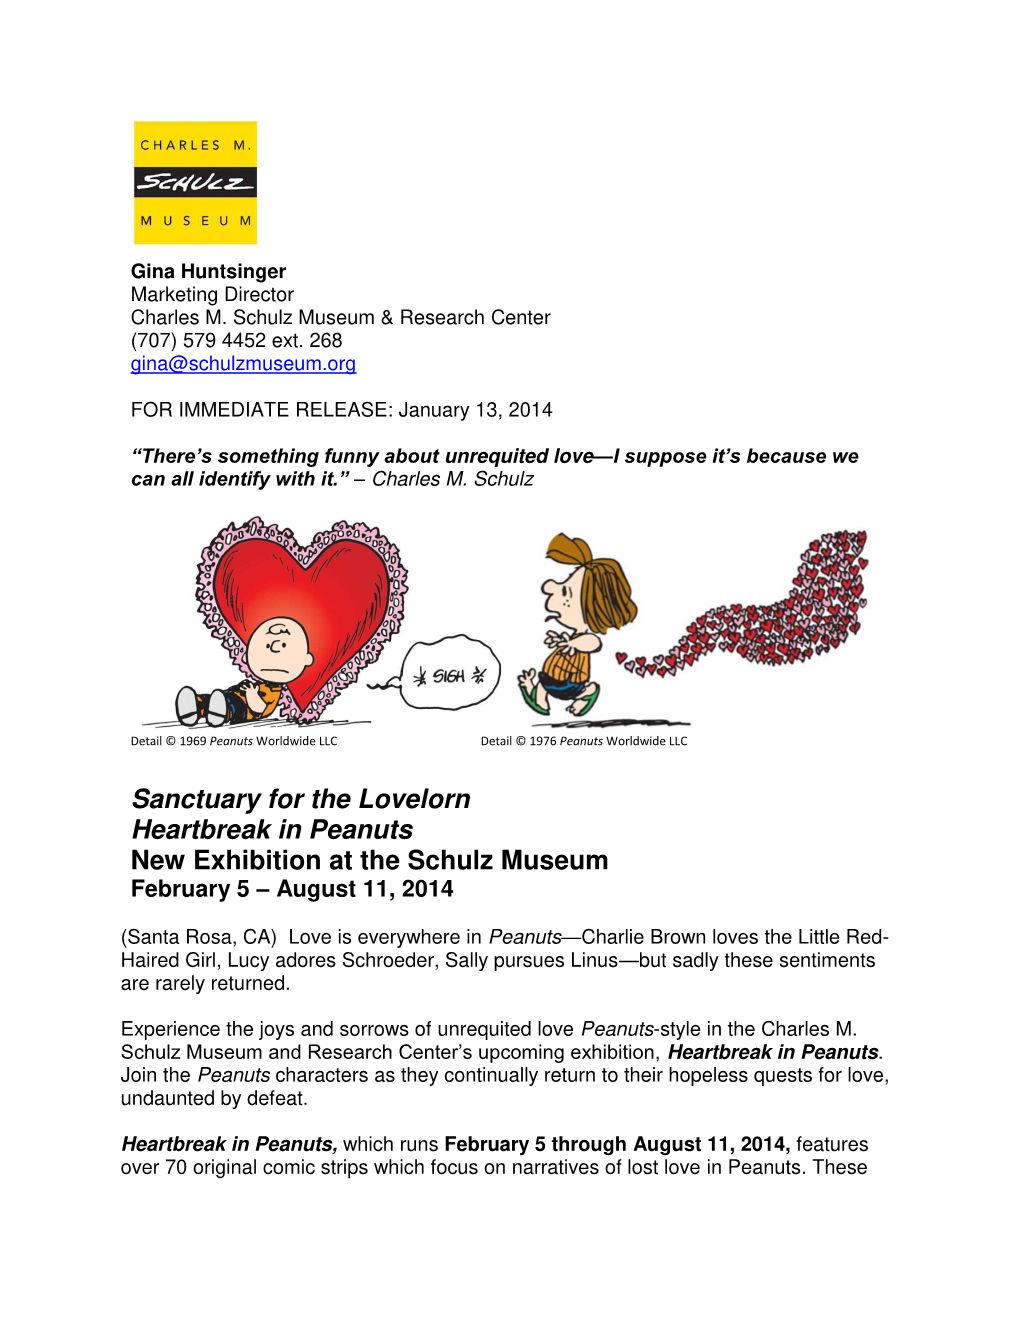 Sanctuary for the Lovelorn Heartbreak in Peanuts New Exhibition at the Schulz Museum February 5 – August 11, 2014